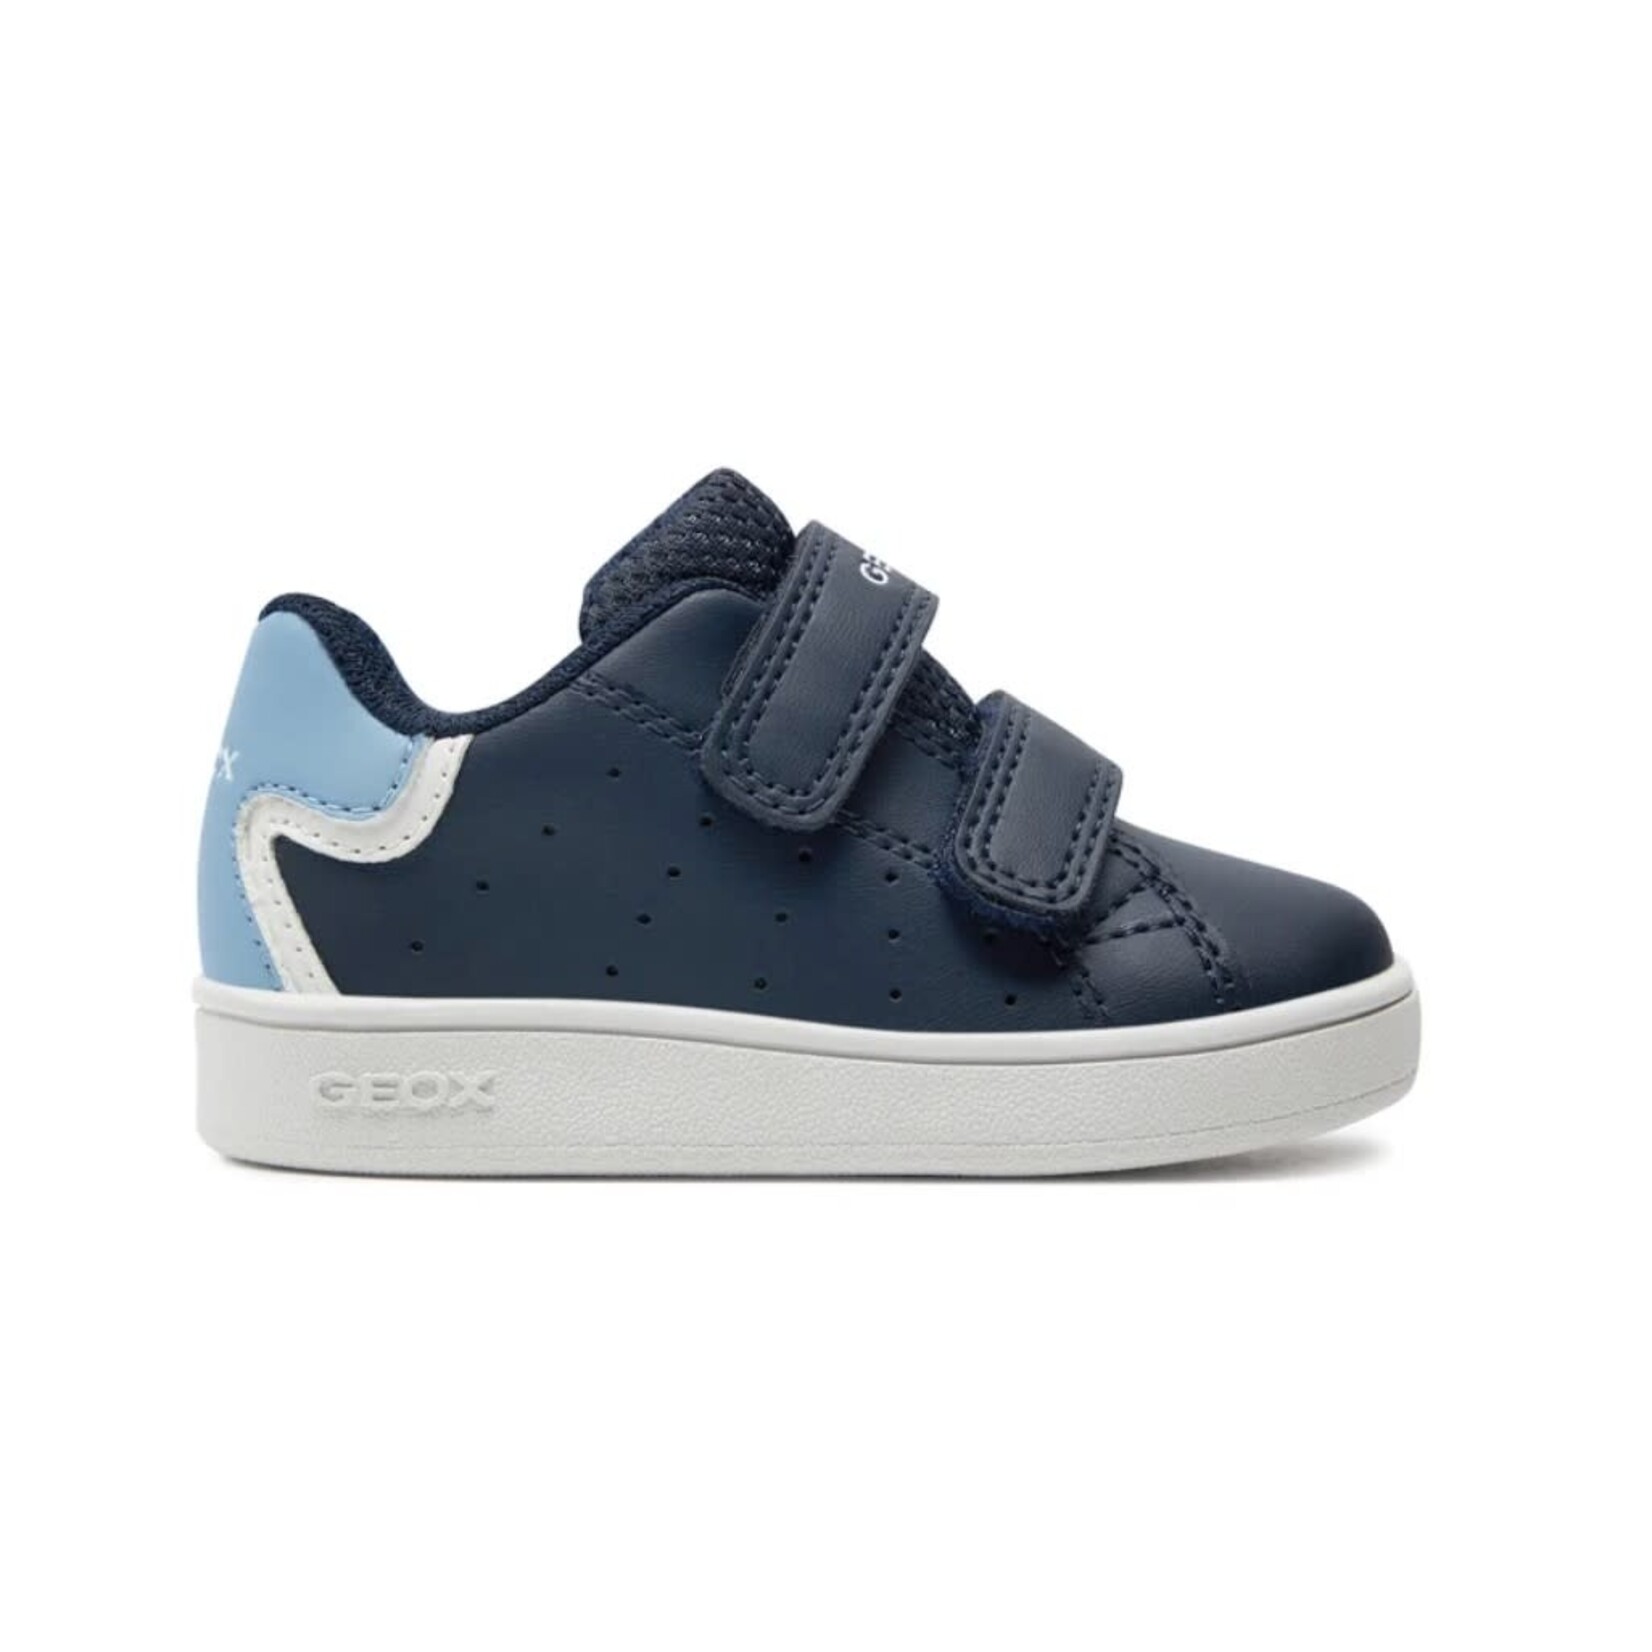 Geox GEOX - Navy synthetic leather shoes 'Eclyper - Navy/Light denim'